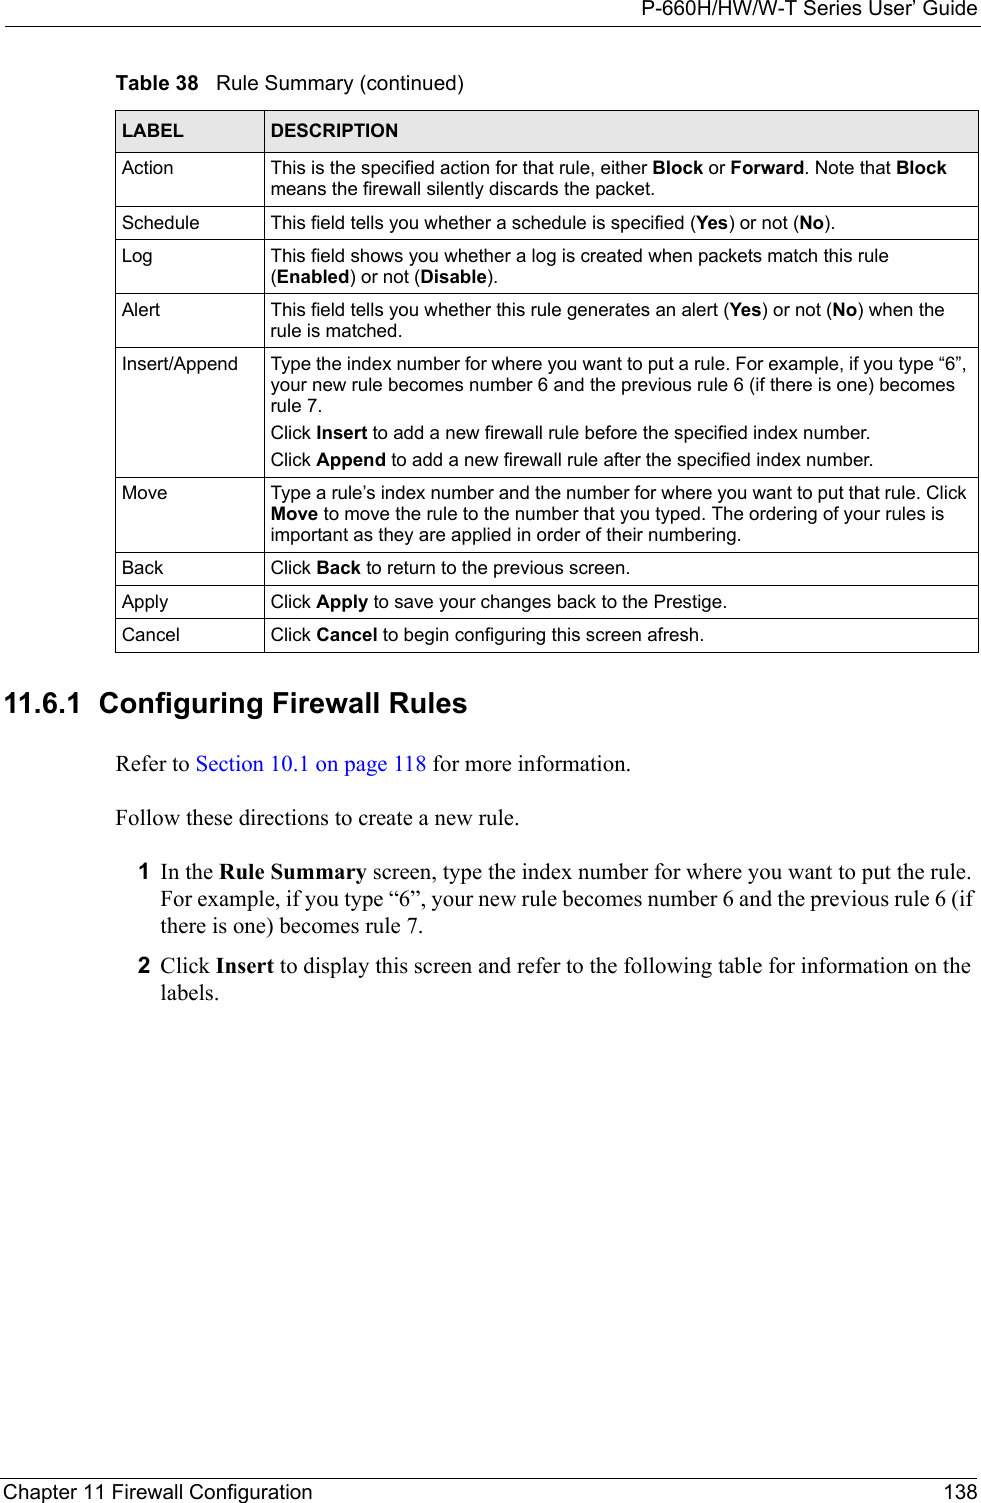 P-660H/HW/W-T Series User’ GuideChapter 11 Firewall Configuration 13811.6.1  Configuring Firewall Rules   Refer to Section 10.1 on page 118 for more information. Follow these directions to create a new rule.1In the Rule Summary screen, type the index number for where you want to put the rule. For example, if you type “6”, your new rule becomes number 6 and the previous rule 6 (if there is one) becomes rule 7. 2Click Insert to display this screen and refer to the following table for information on the labels.Action This is the specified action for that rule, either Block or Forward. Note that Block means the firewall silently discards the packet.Schedule This field tells you whether a schedule is specified (Yes) or not (No).Log This field shows you whether a log is created when packets match this rule (Enabled) or not (Disable).Alert This field tells you whether this rule generates an alert (Yes) or not (No) when the rule is matched.Insert/Append Type the index number for where you want to put a rule. For example, if you type “6”, your new rule becomes number 6 and the previous rule 6 (if there is one) becomes rule 7. Click Insert to add a new firewall rule before the specified index number. Click Append to add a new firewall rule after the specified index number. Move Type a rule’s index number and the number for where you want to put that rule. Click Move to move the rule to the number that you typed. The ordering of your rules is important as they are applied in order of their numbering.Back Click Back to return to the previous screen. Apply Click Apply to save your changes back to the Prestige.Cancel Click Cancel to begin configuring this screen afresh.Table 38   Rule Summary (continued)LABEL DESCRIPTION